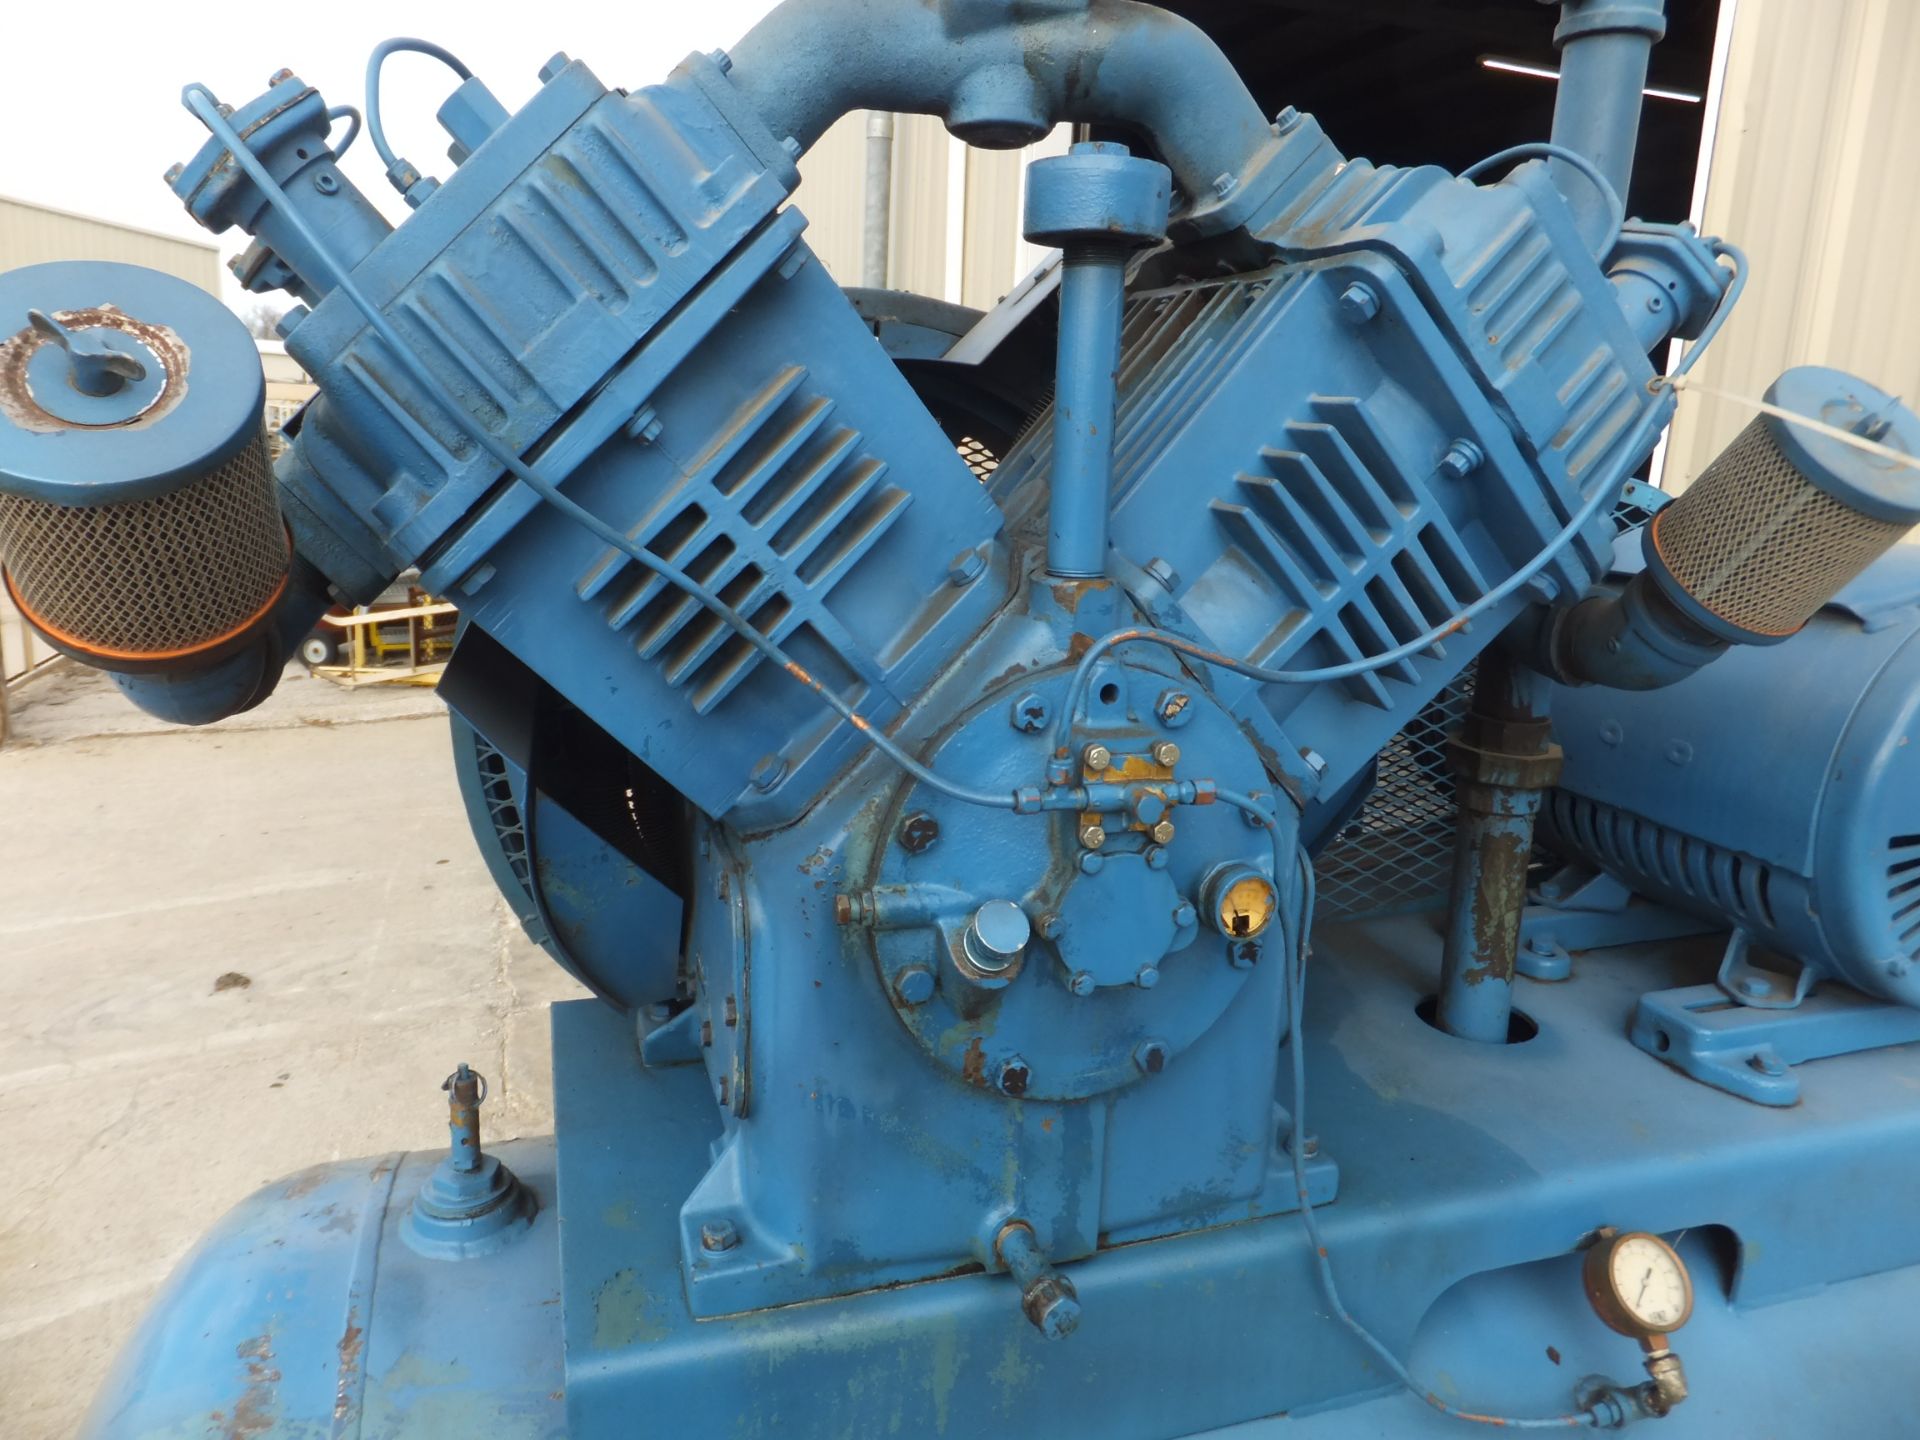 Quincy 25 Hp Reciprocating Air Compressor, Model 5120, S/N 160353 L, Size 6 & 3-1/4 x 4, Lincoln - Image 4 of 10